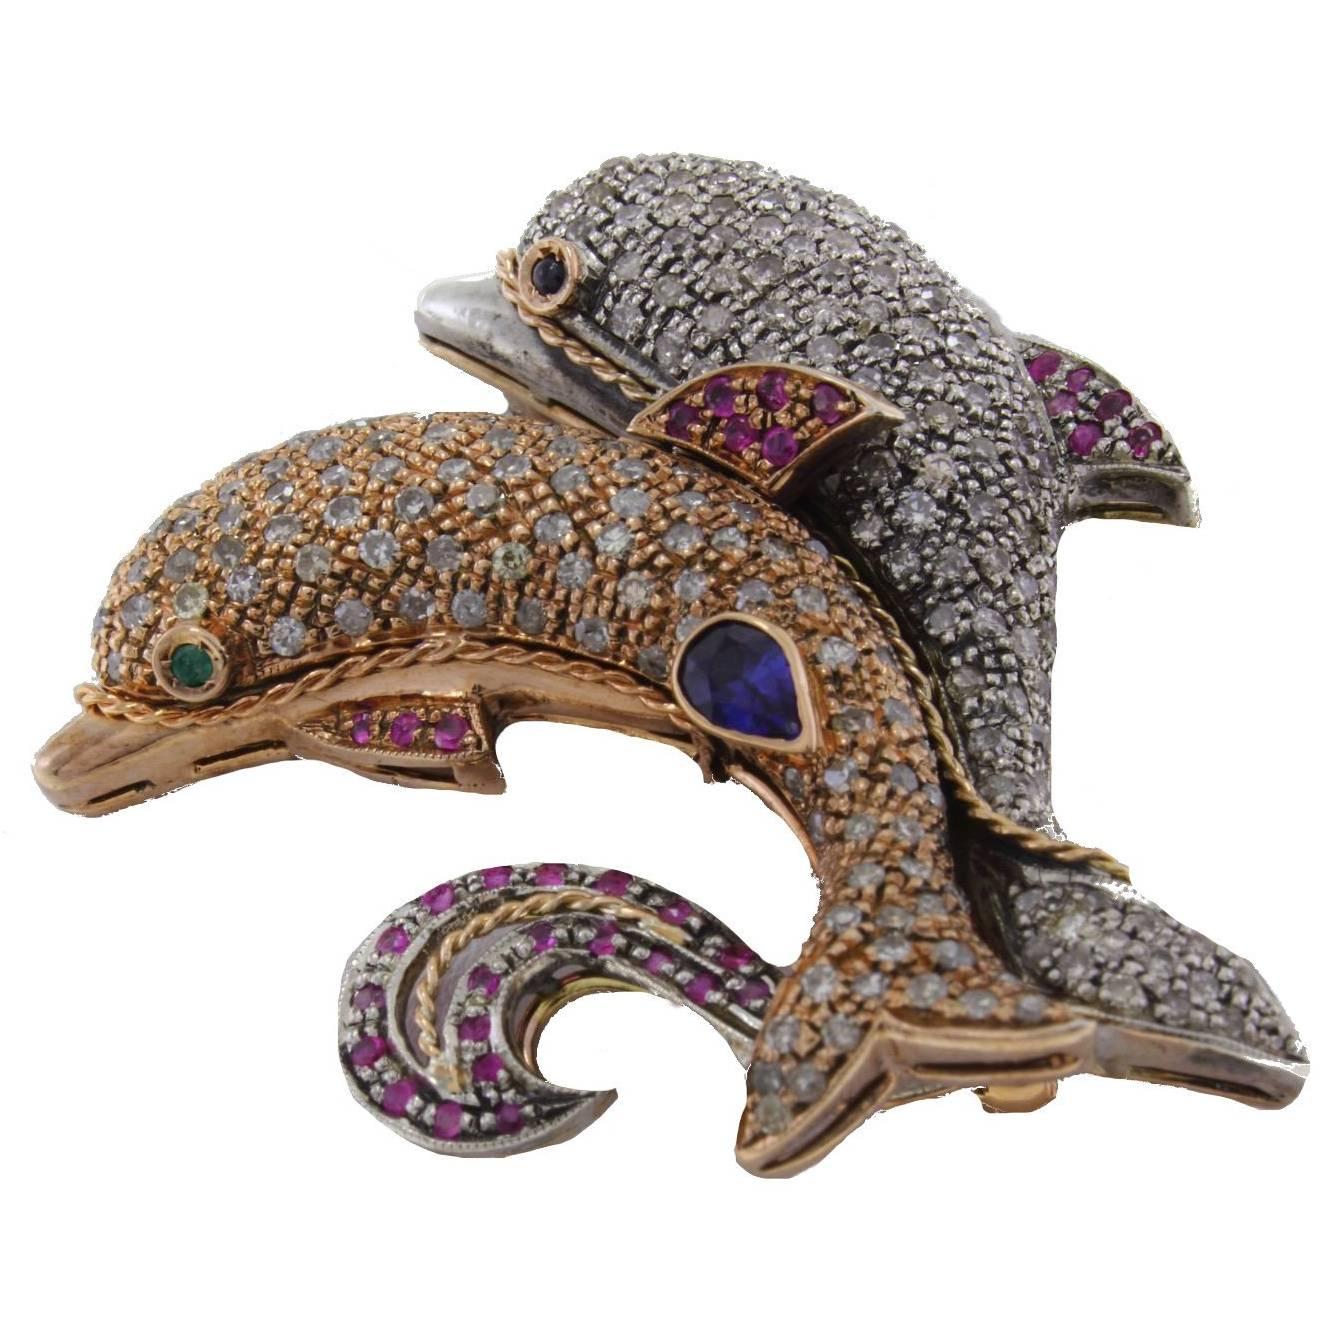  KT 1, 25 Ruby Sapphire KT 3, 60 Diamond Gold and Silver Dolphins Brooch Pendant